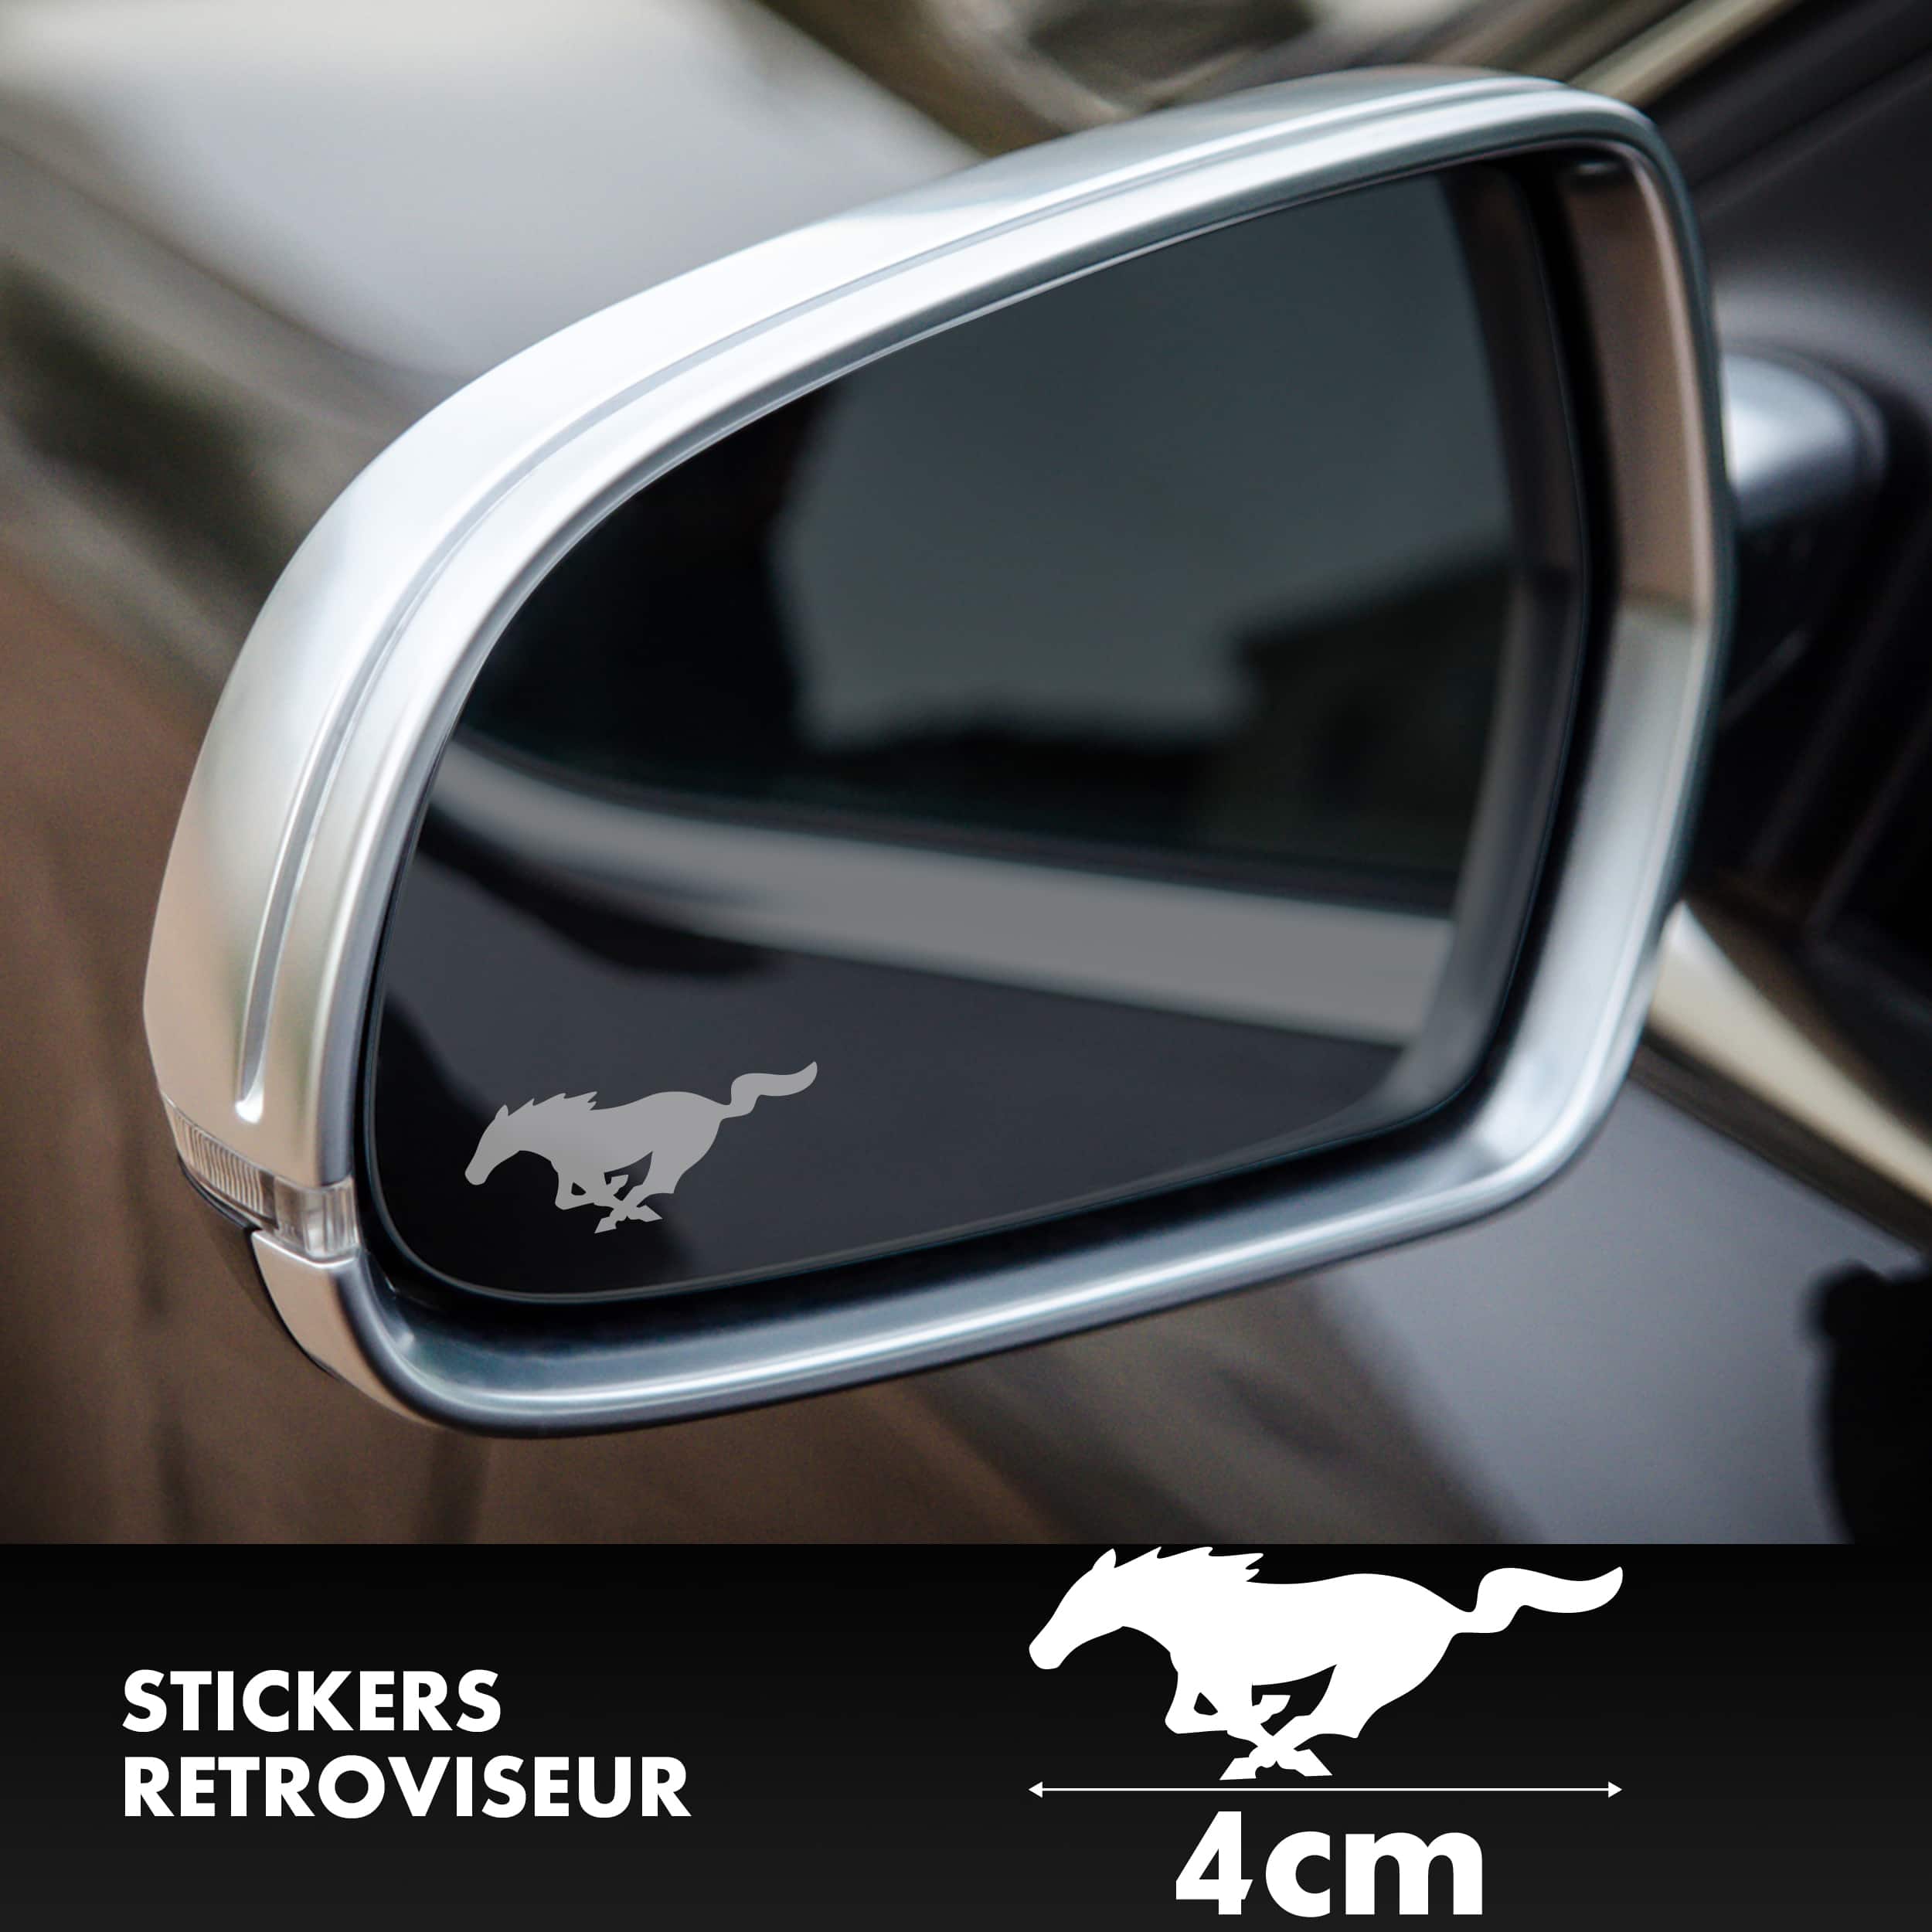 STICKERS RETROVISEUR FORD MUSTANG